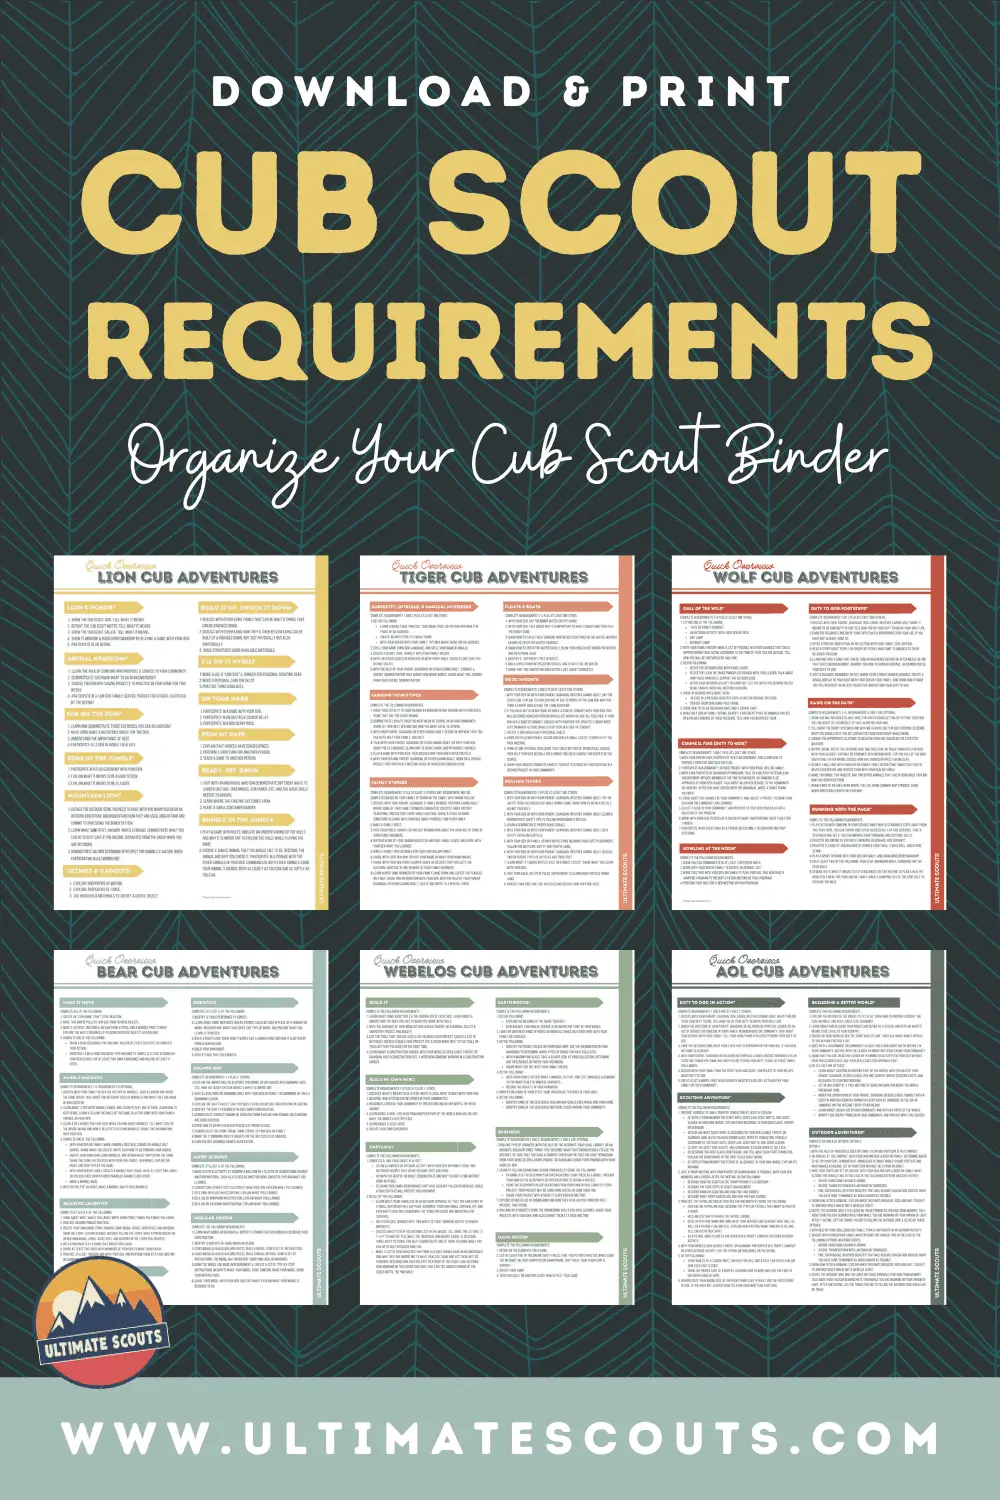 Cub Scout Binder – Printable Of All Requirements